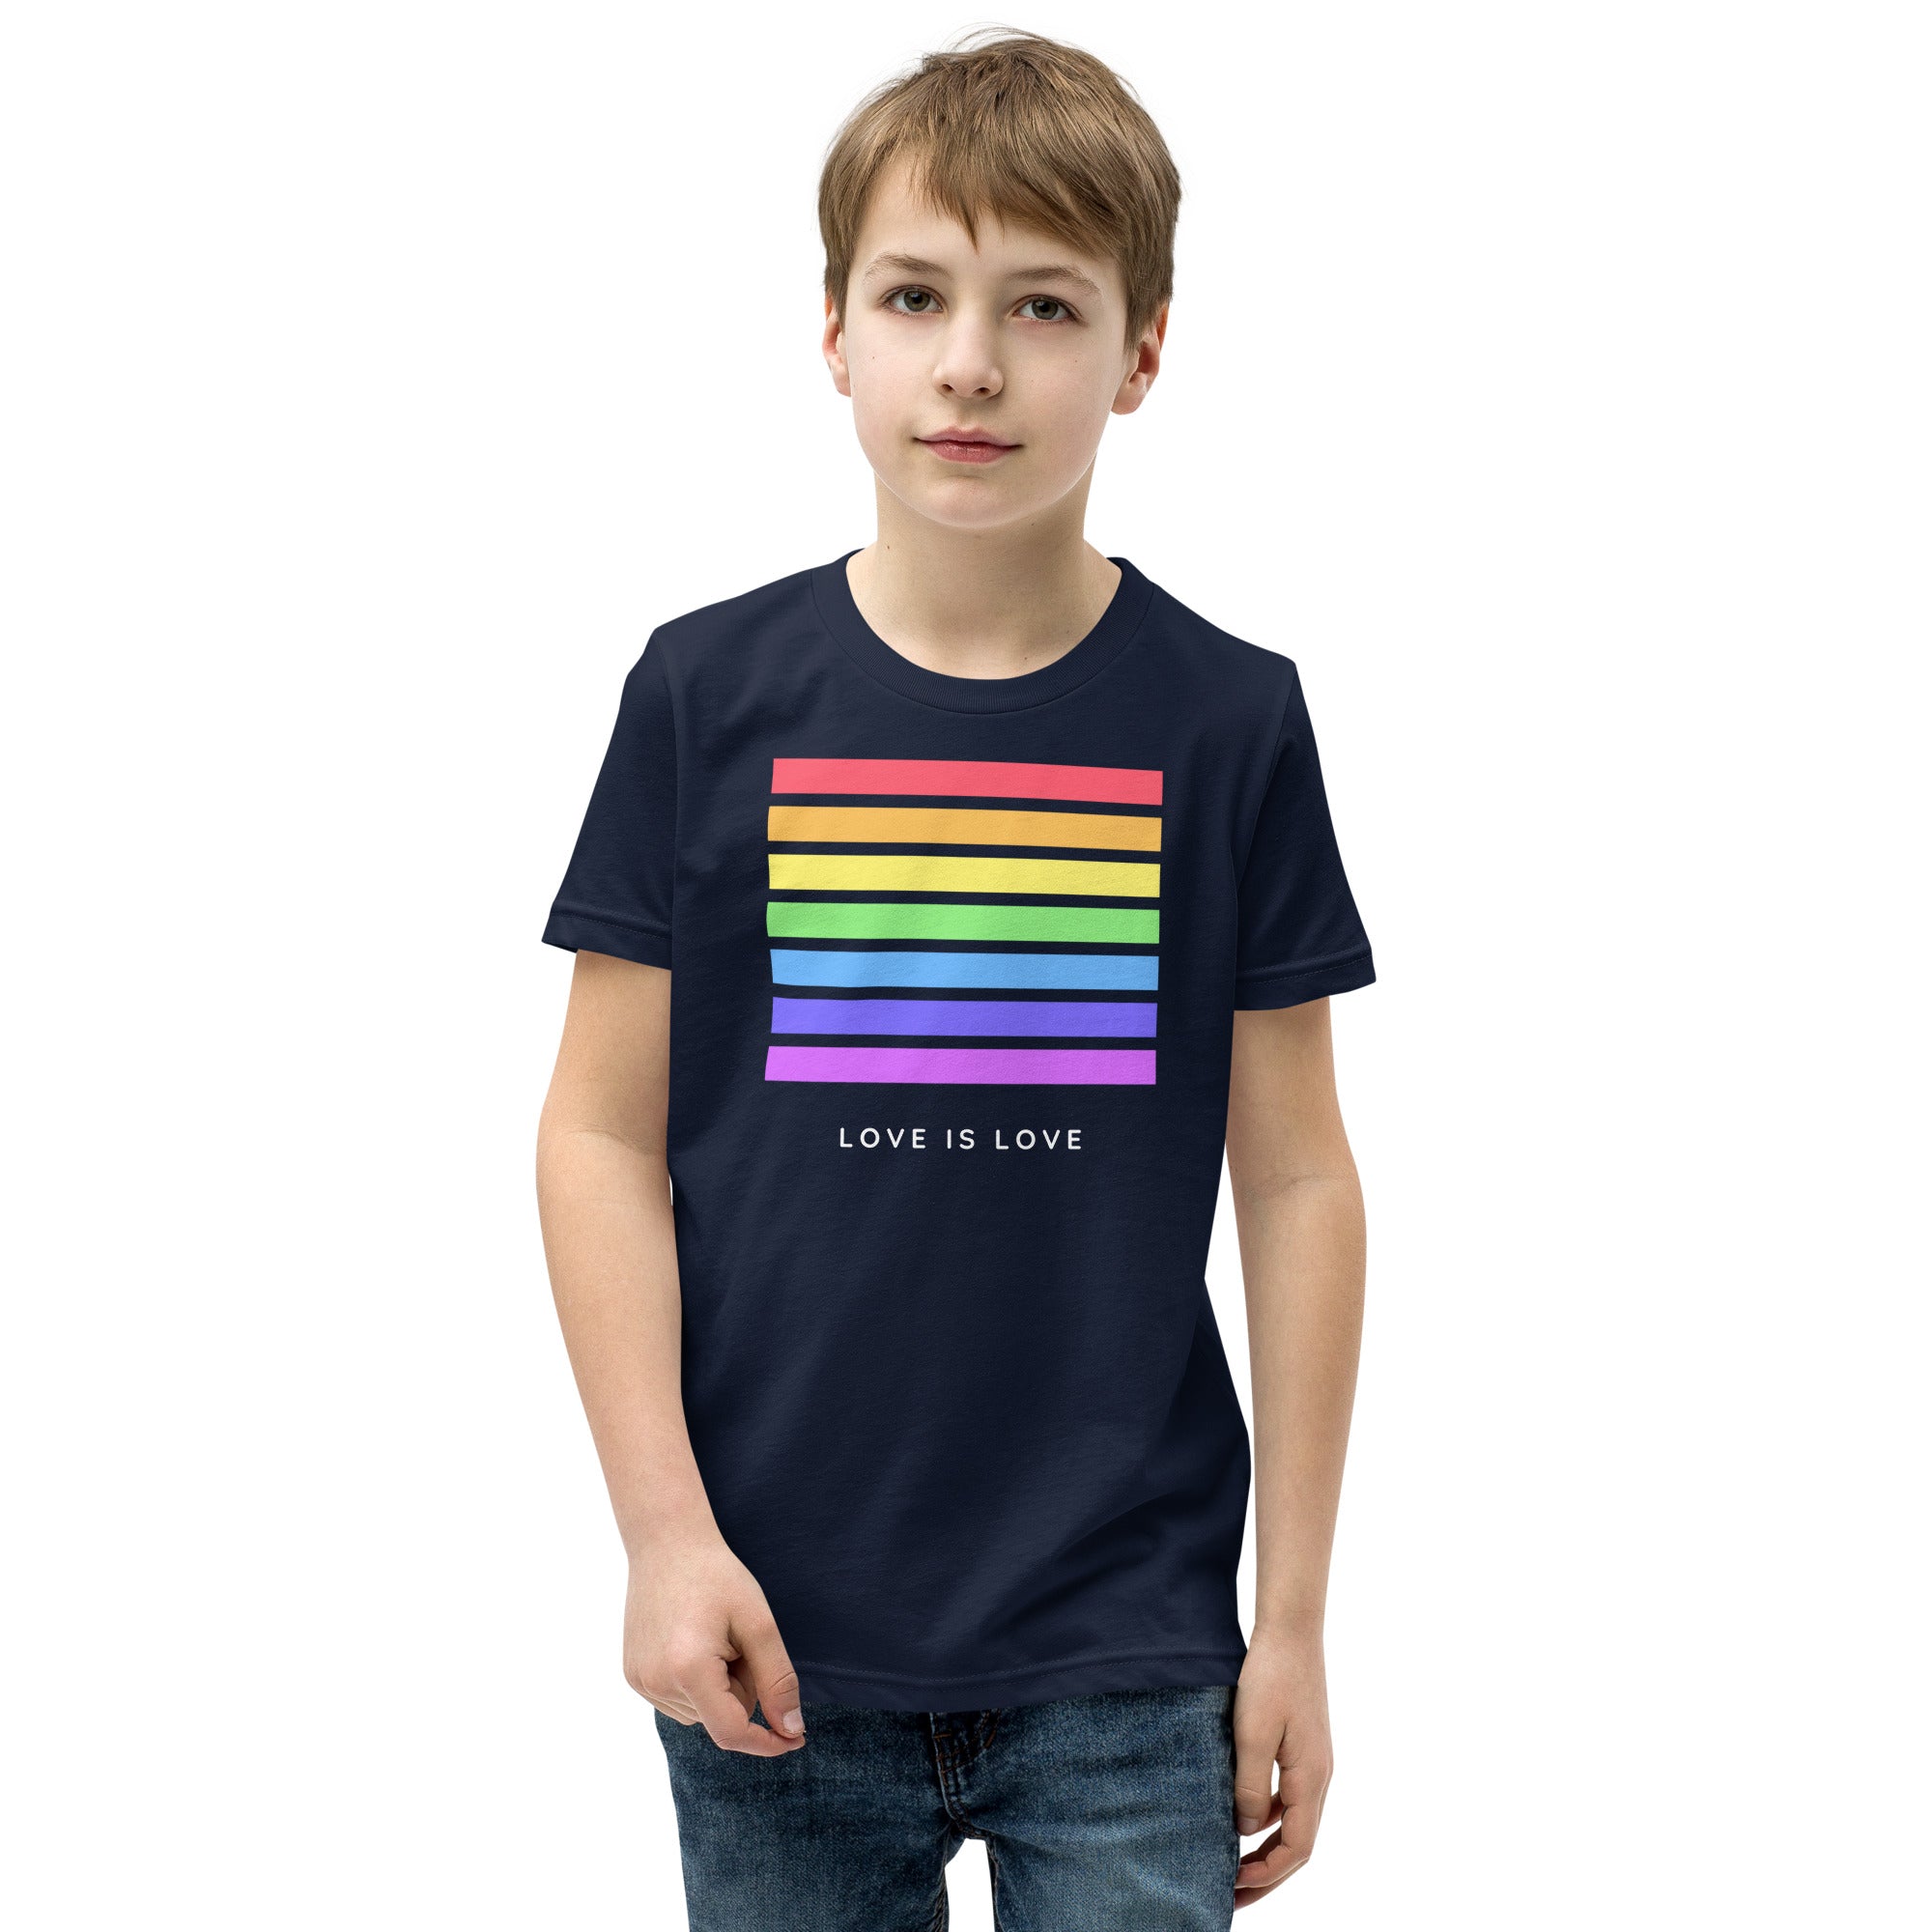 Love Is Love - Youth Short Sleeve T-Shirt